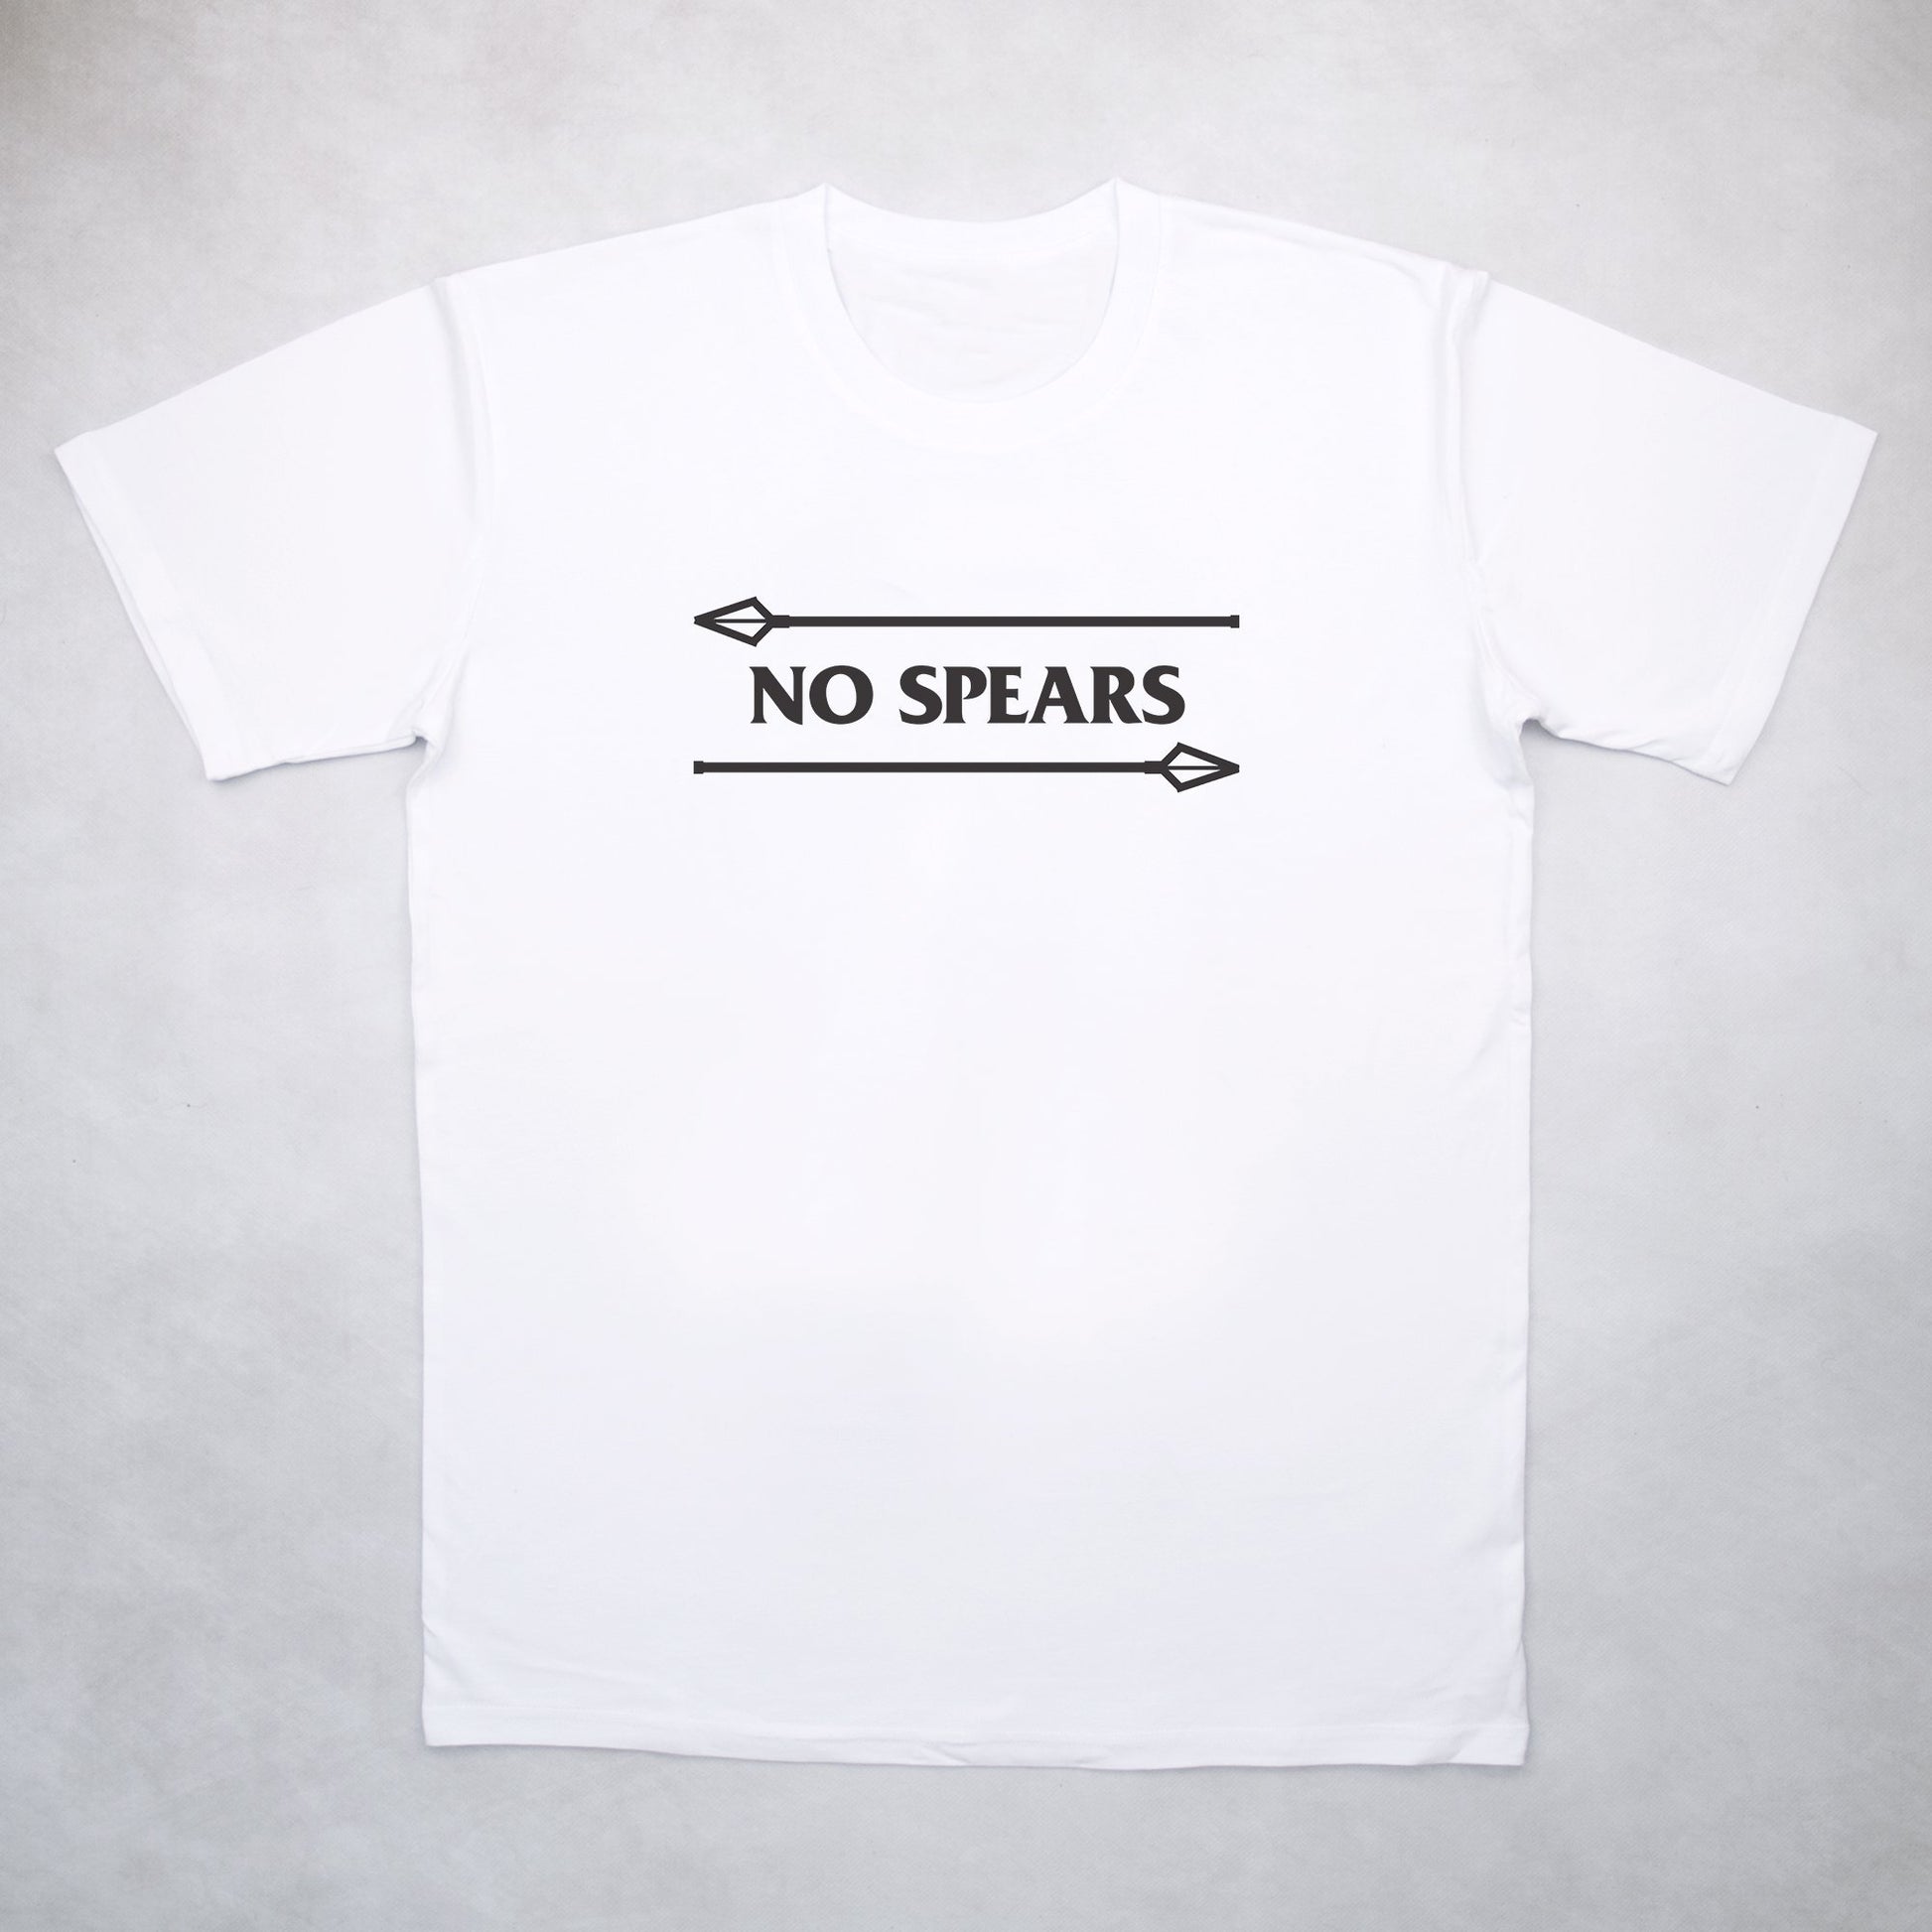 Classy Duds Short Sleeve T-Shirts S / White / Standard No Spears Tee